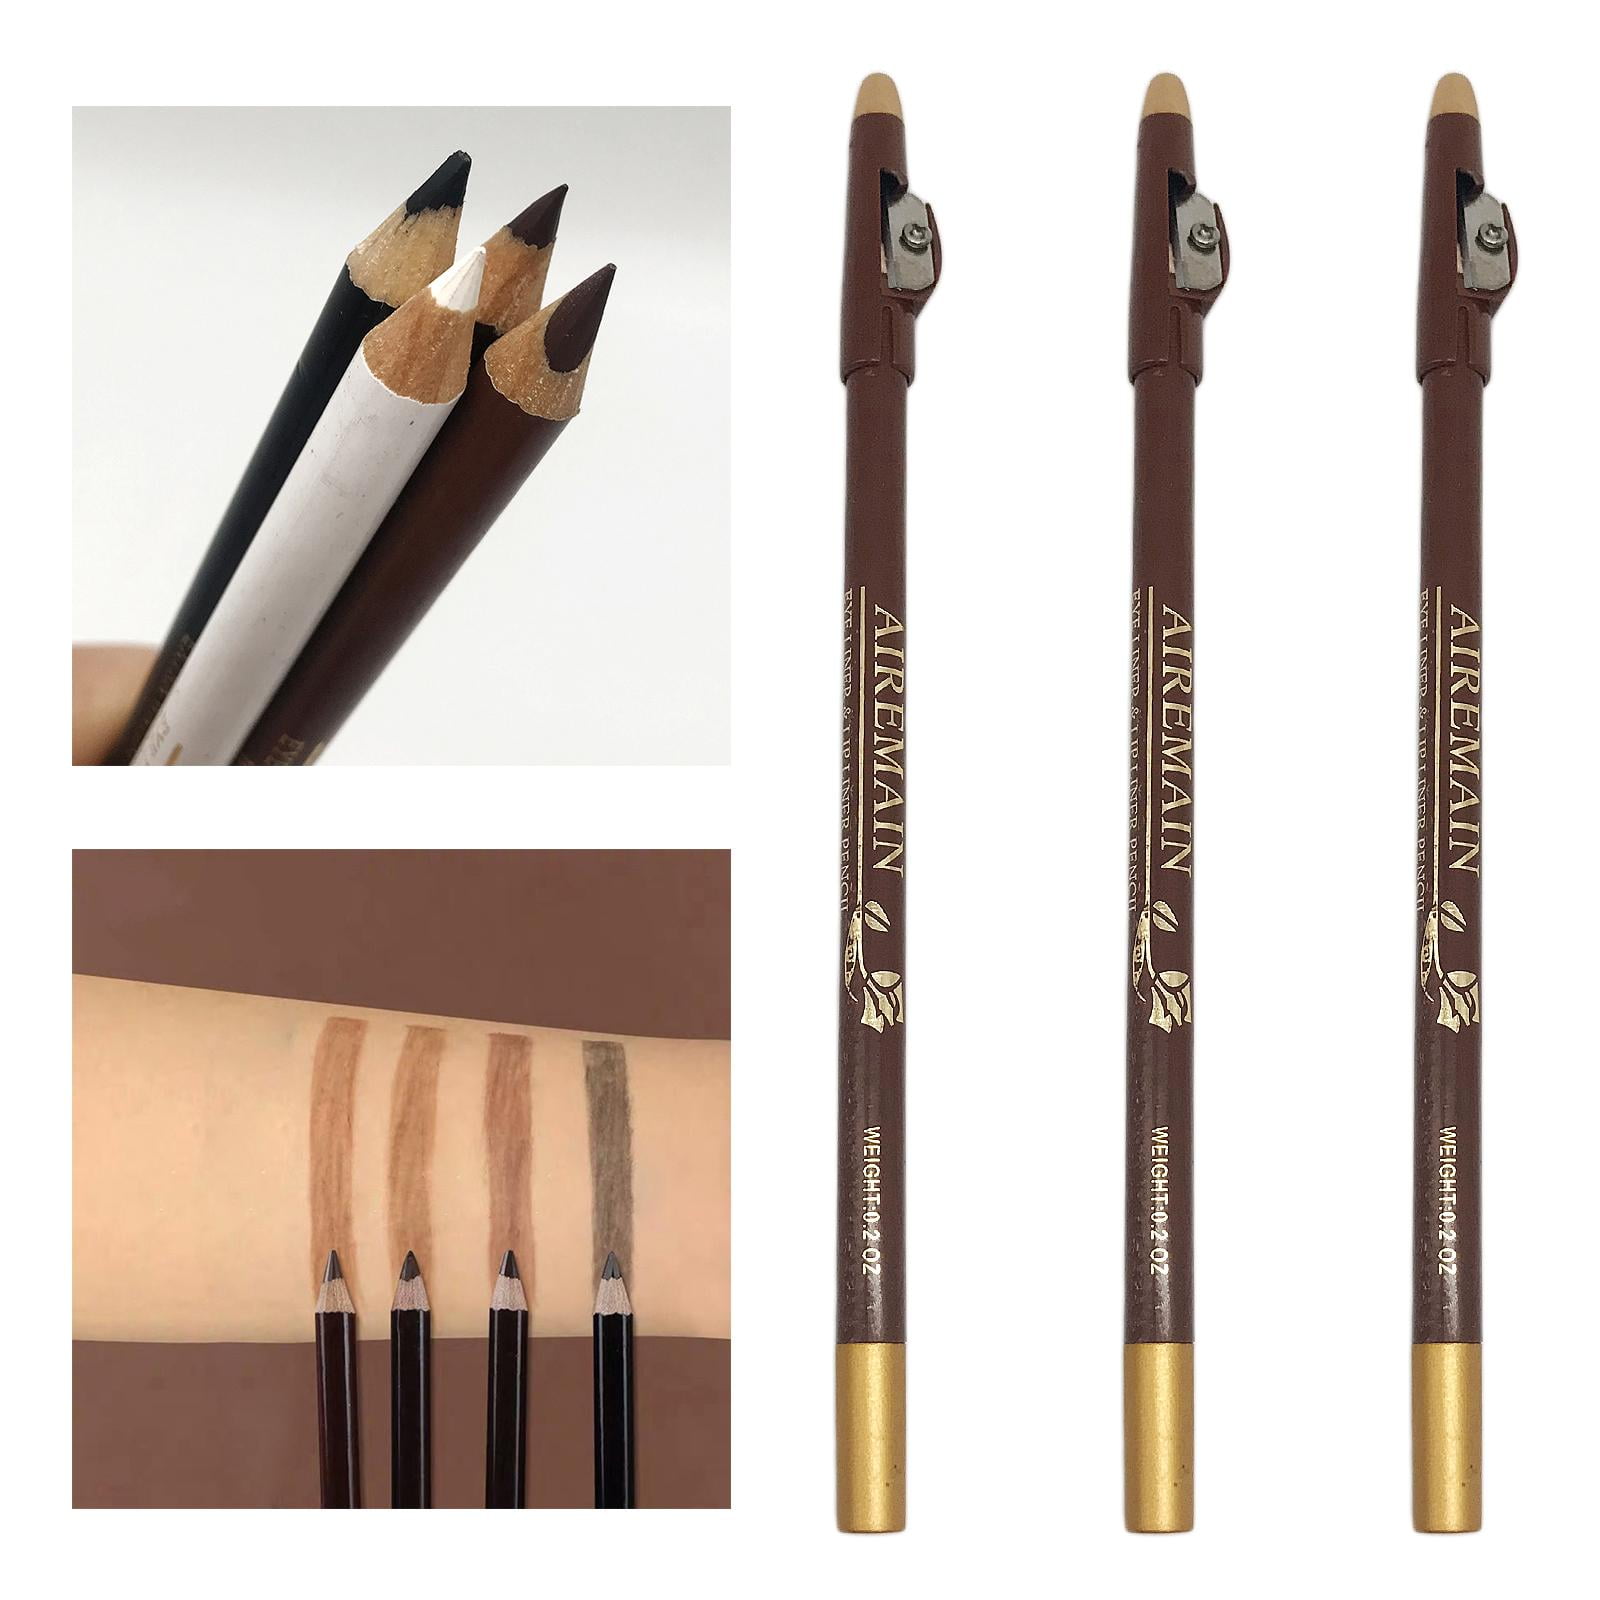 3X Barber Pencil Tool Professional Hairline Barber Pencil for Making Beard Arches - The Barber Pencil Is used to Draw Onto Natural Hairline ,Dark